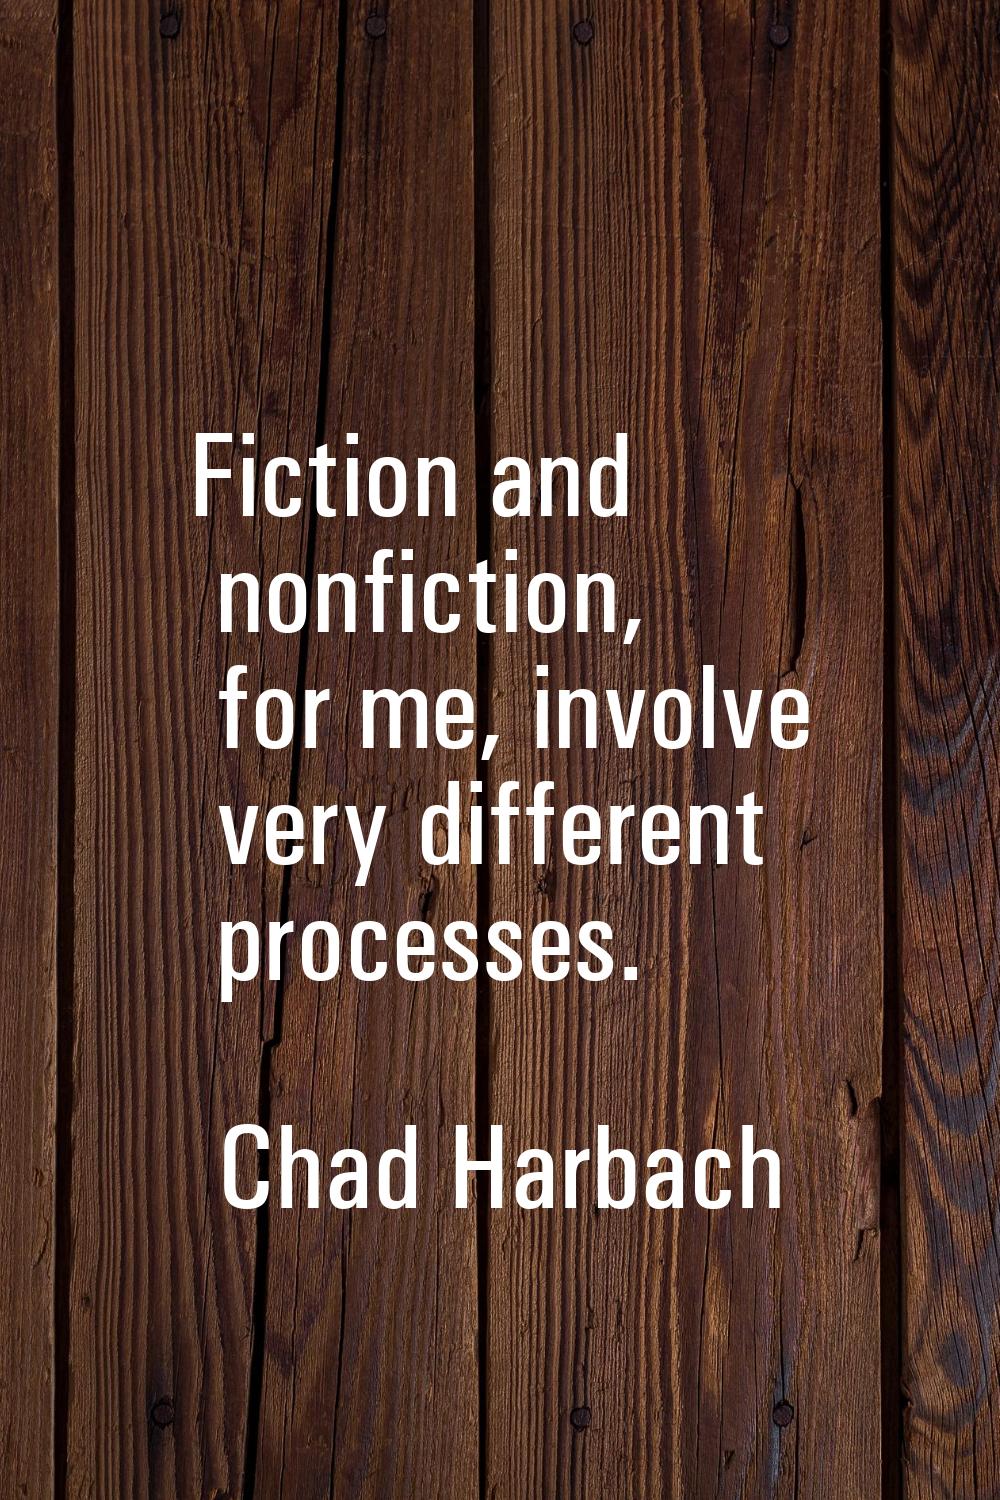 Fiction and nonfiction, for me, involve very different processes.